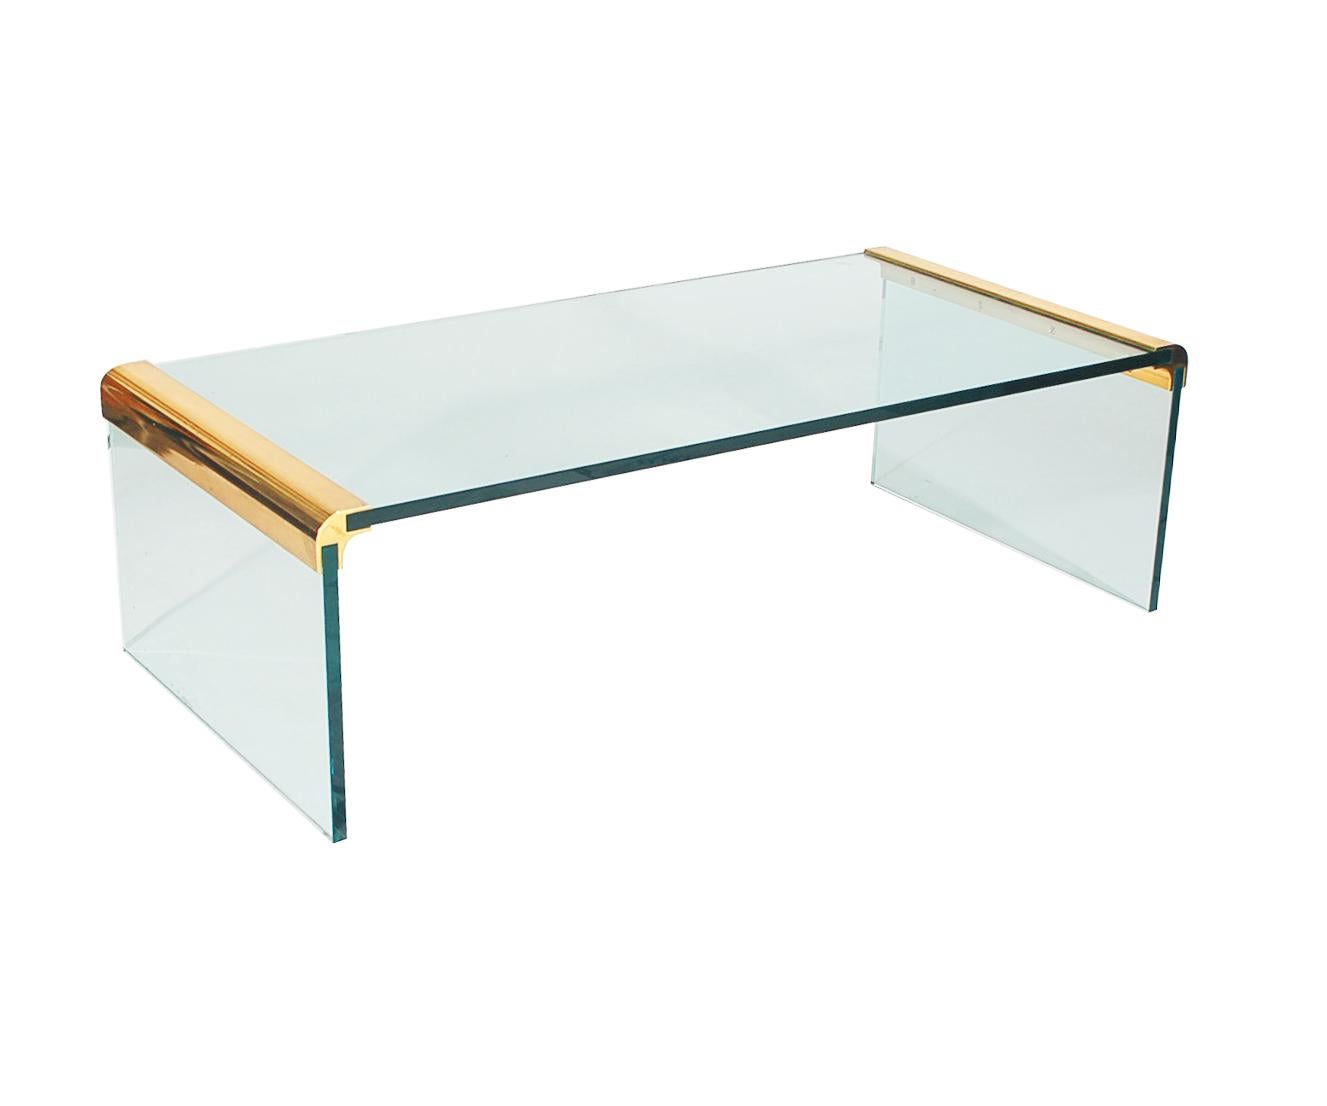 A simple modern design by Leon Rosen and produced by Pace Furniture in the 1970s. This table features extremely thick glass construction with brass brackets.